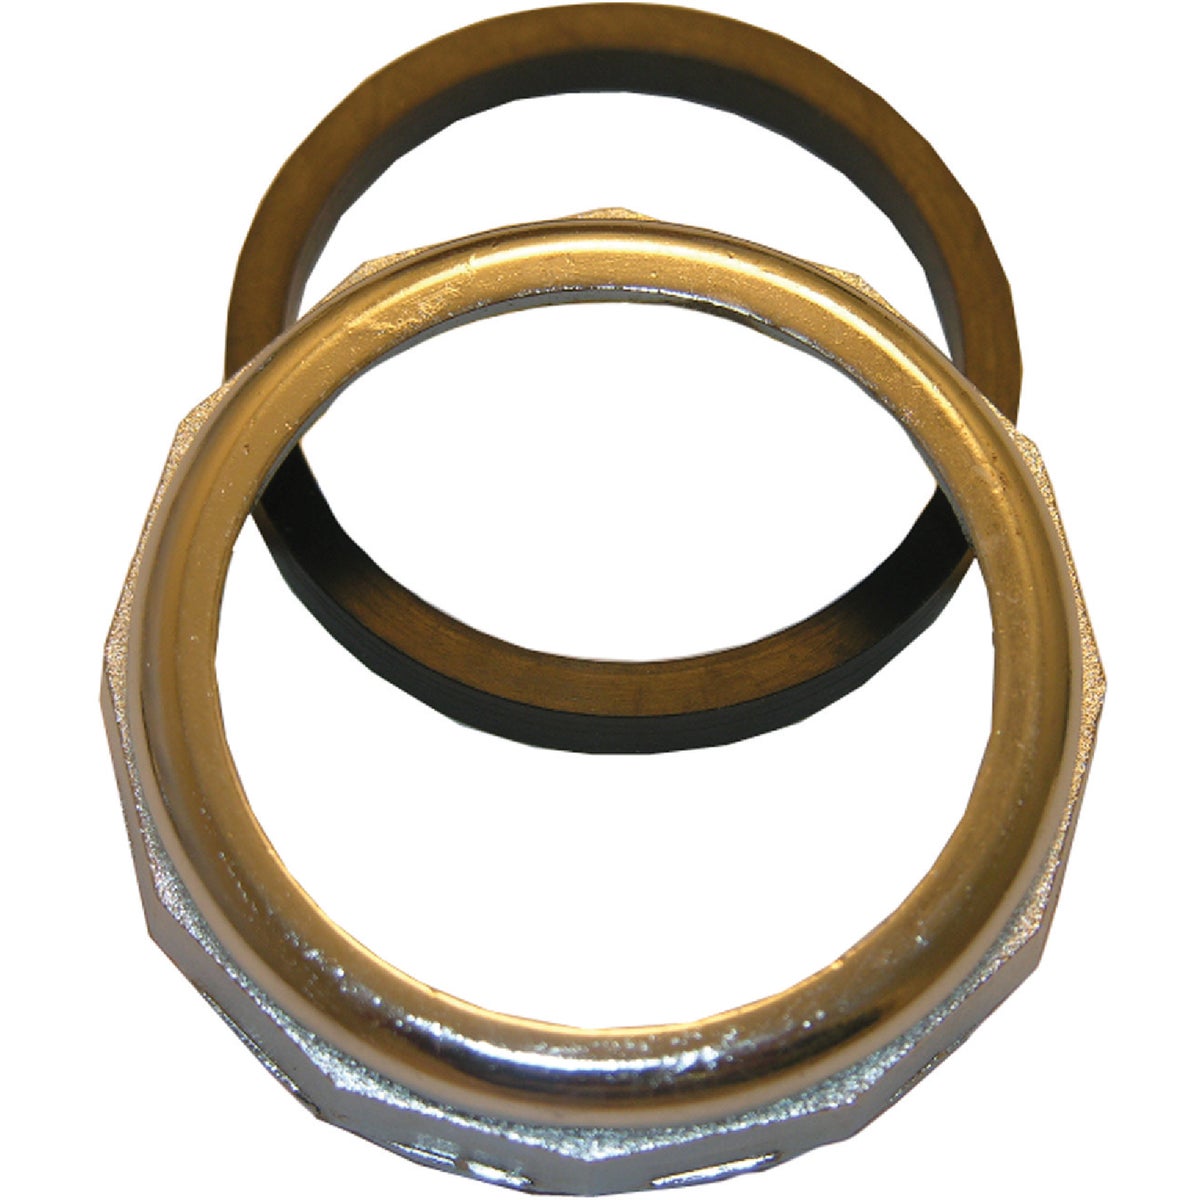 Lasco 1-1/2 In. x 1-1/2 In. Chrome Plated Slip Joint Nut and Washer